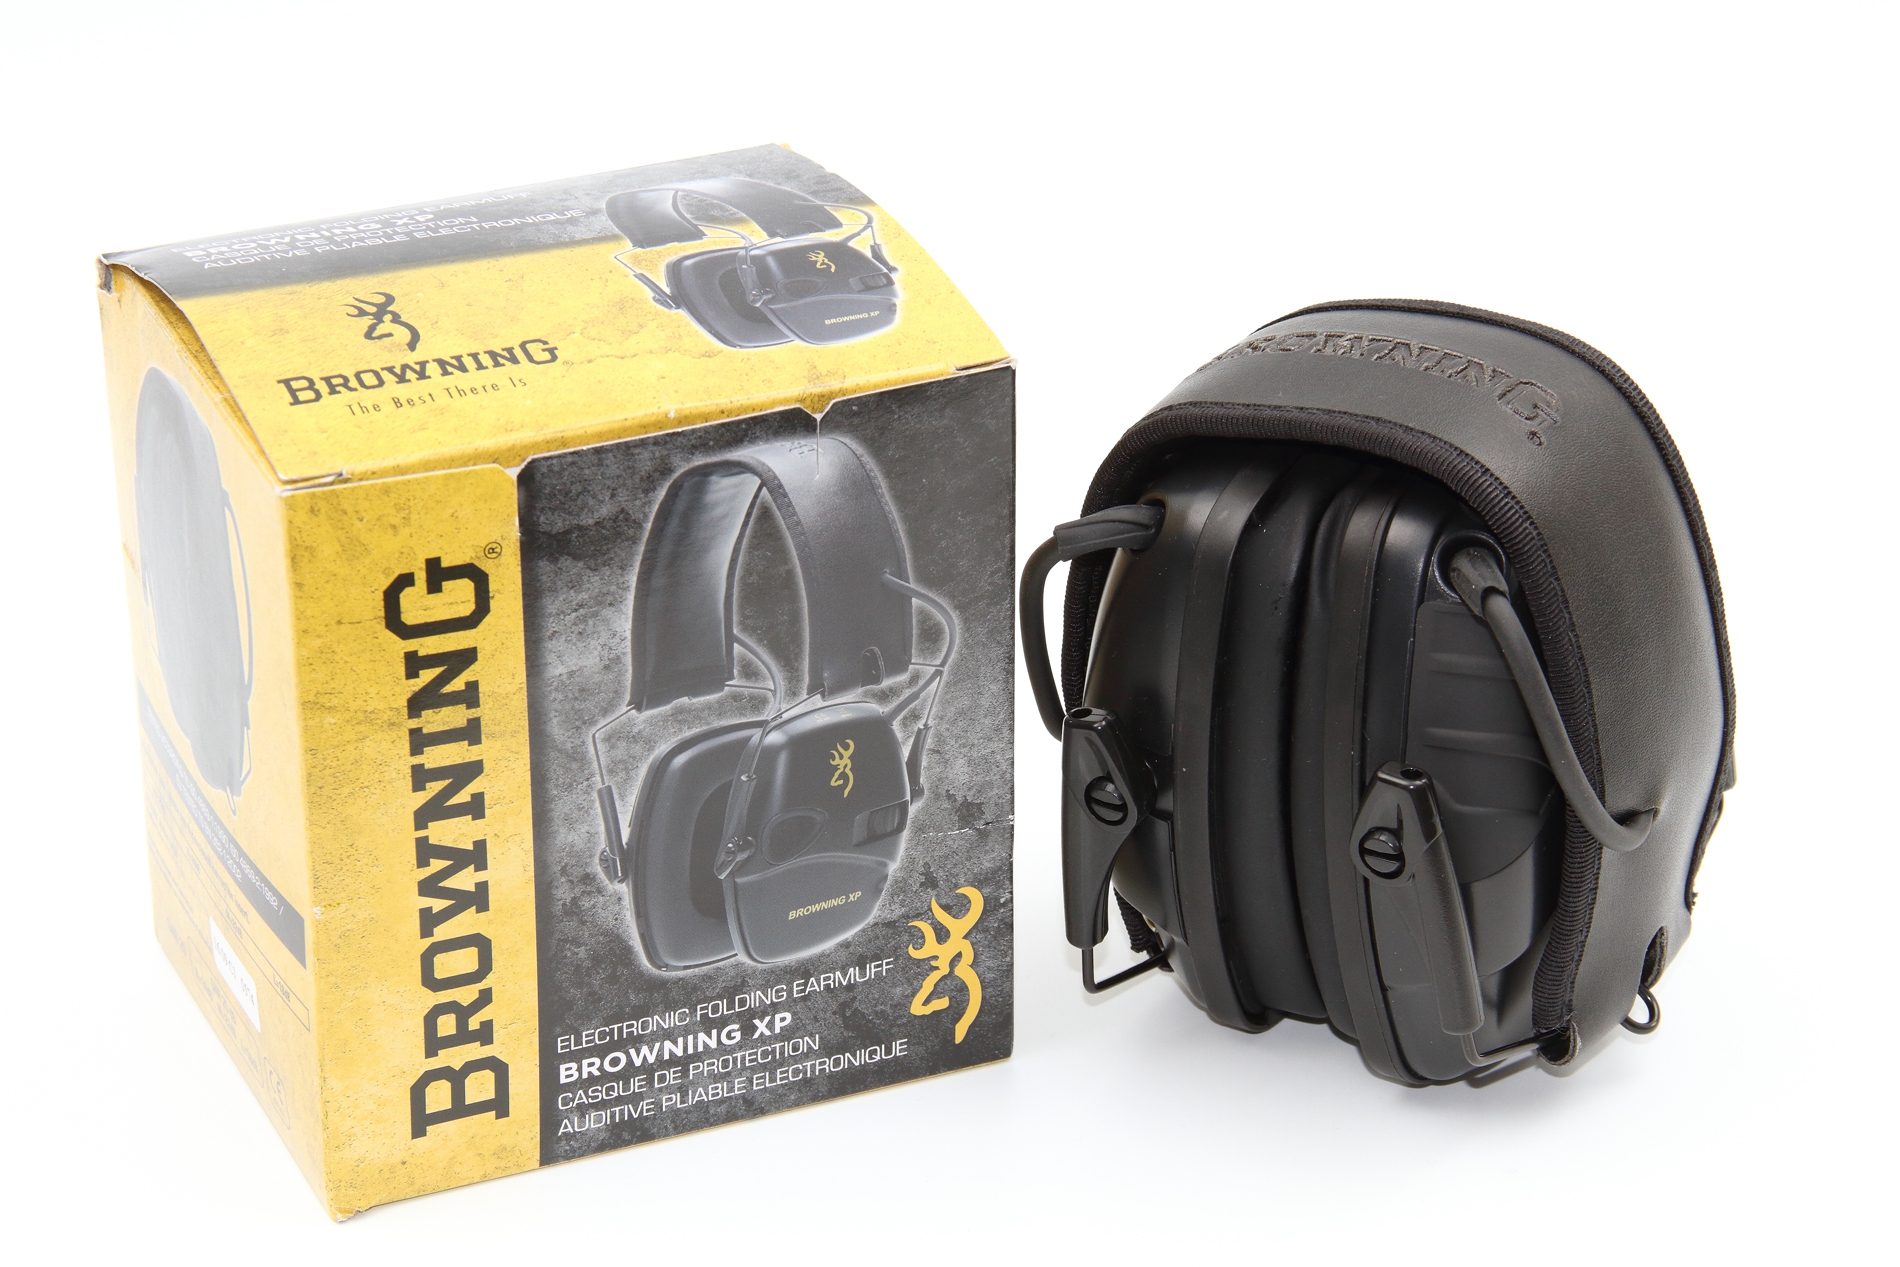 CASQUE ANTI-BRUIT ELECTRONIQUE BROWNING CADENCE - ACCESSOIRES TIR